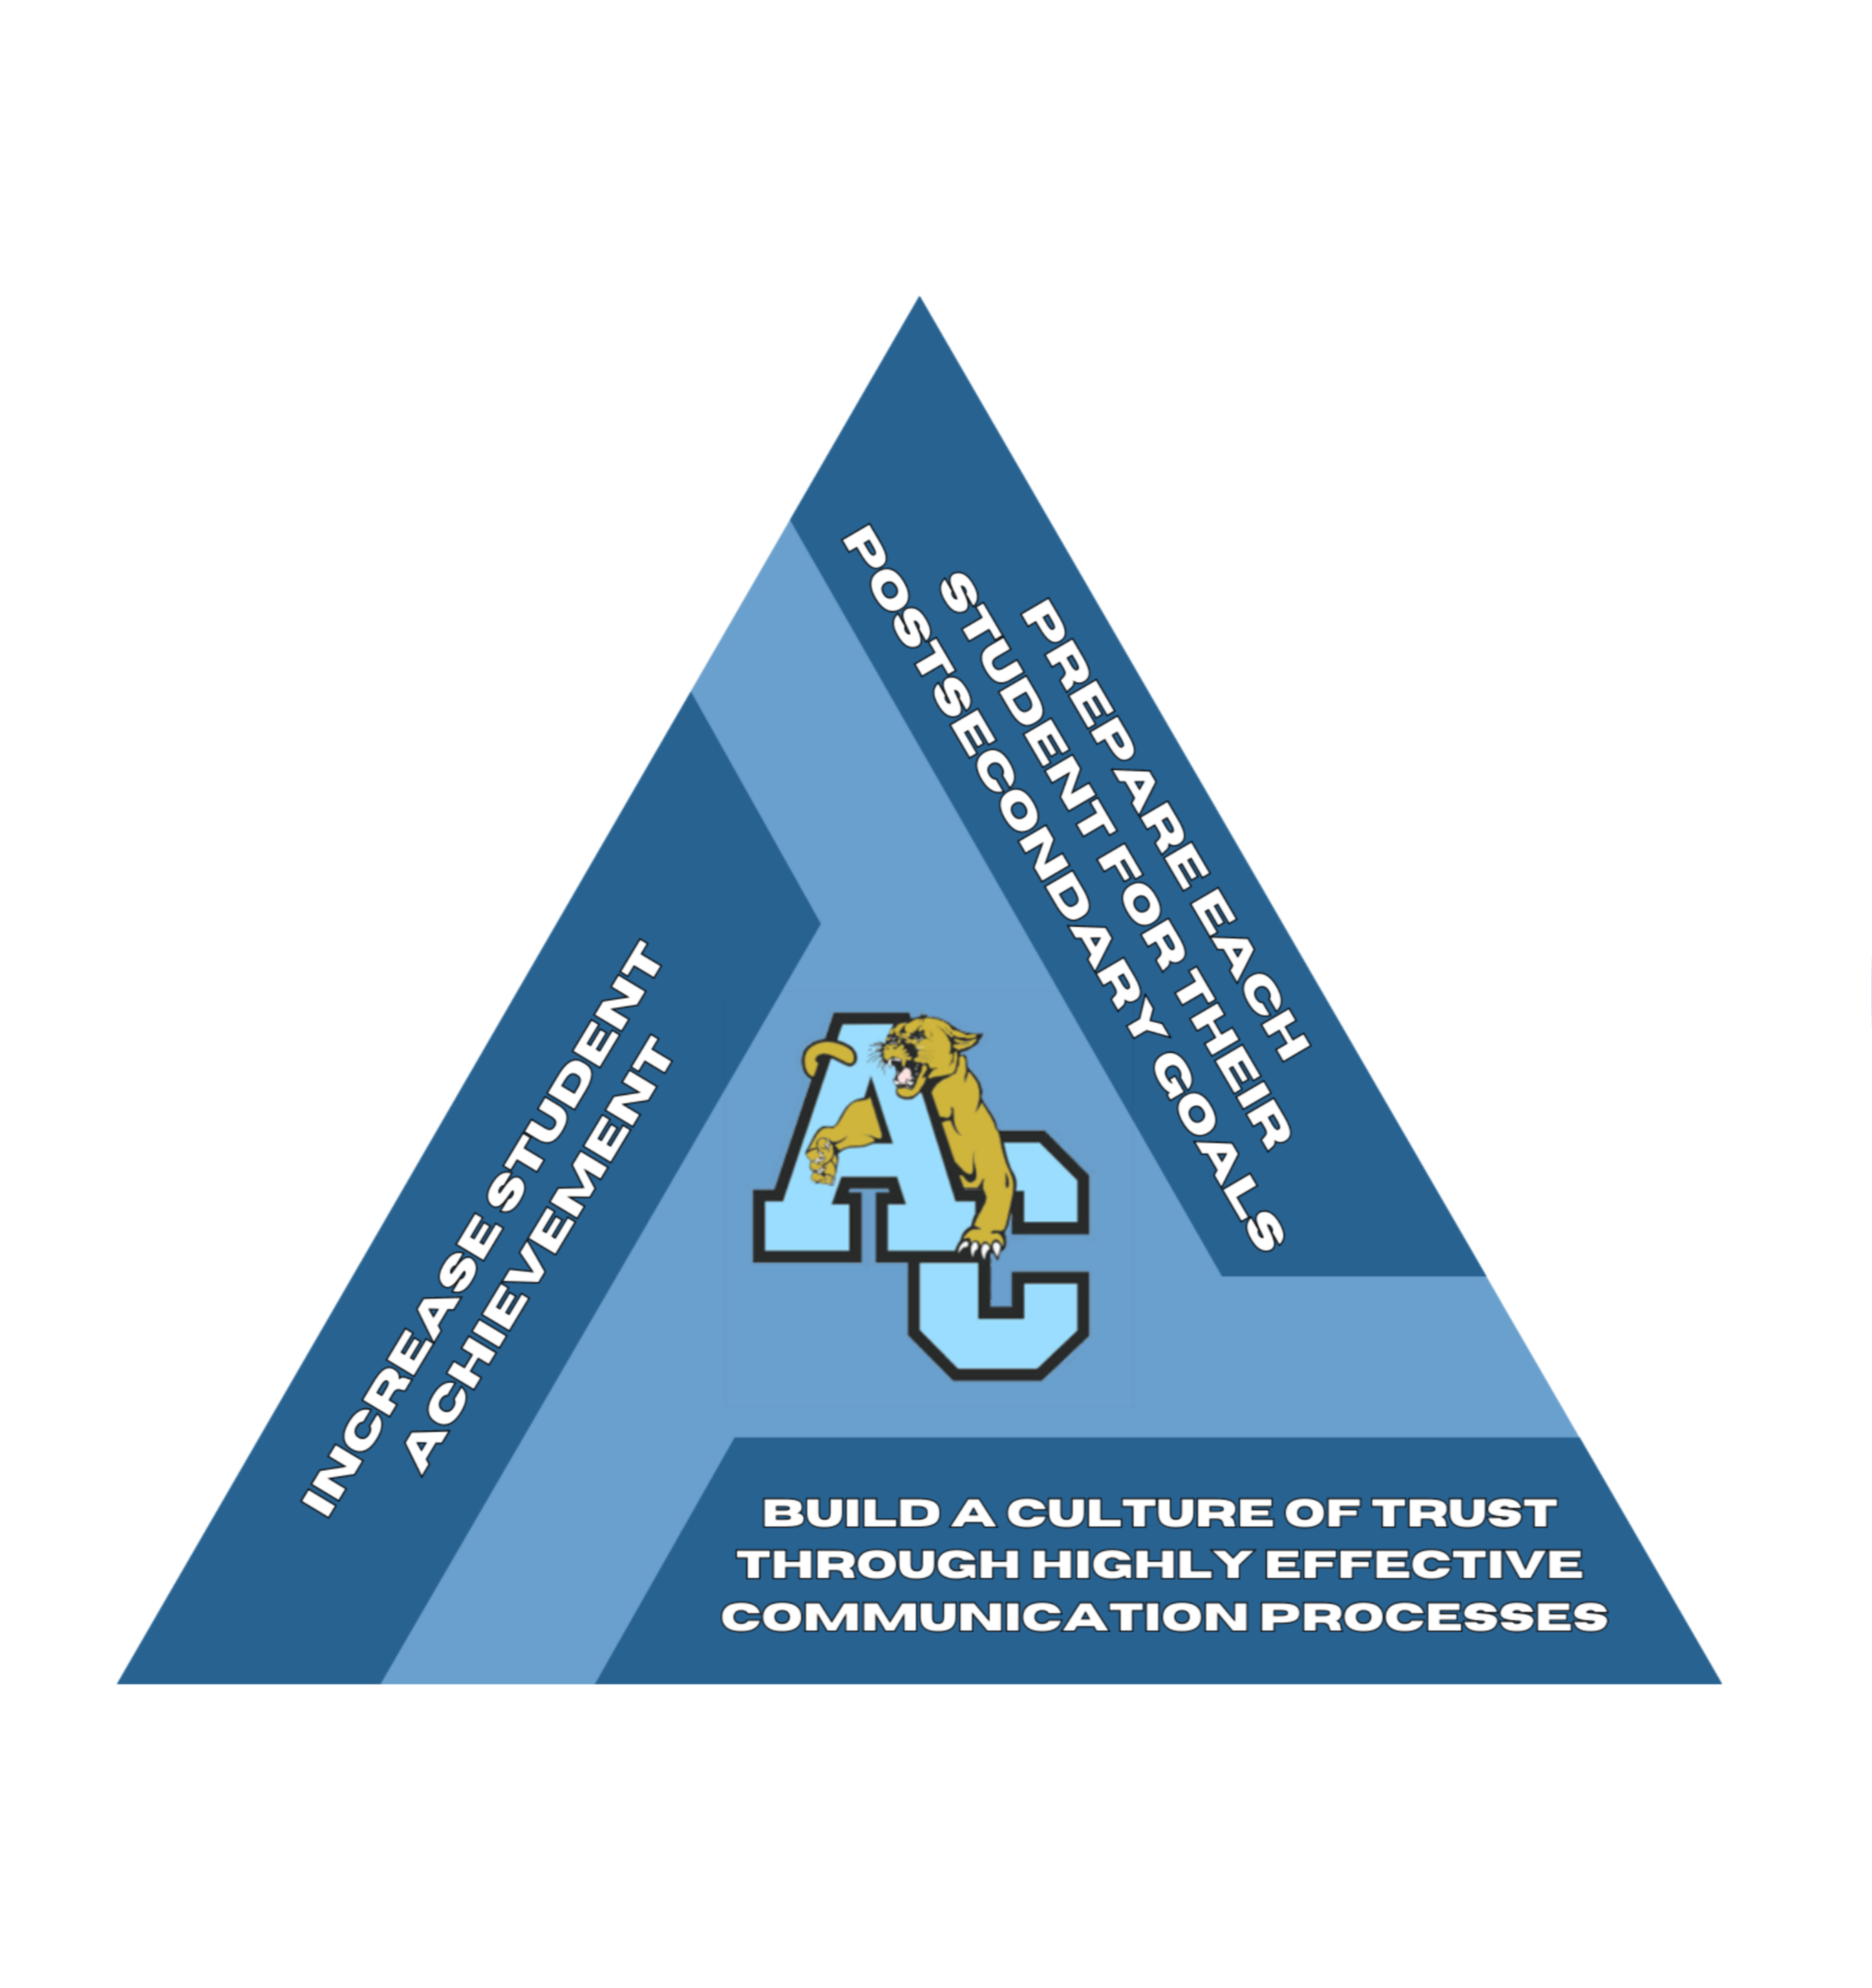 a triangle graphic outlining the three core values of Sheridan School District #3: Increase Student Achievement, Prepare Each Student for their Post Secondary Goals, and Build a Culture of Trust Through Highly Effective Communication Processes